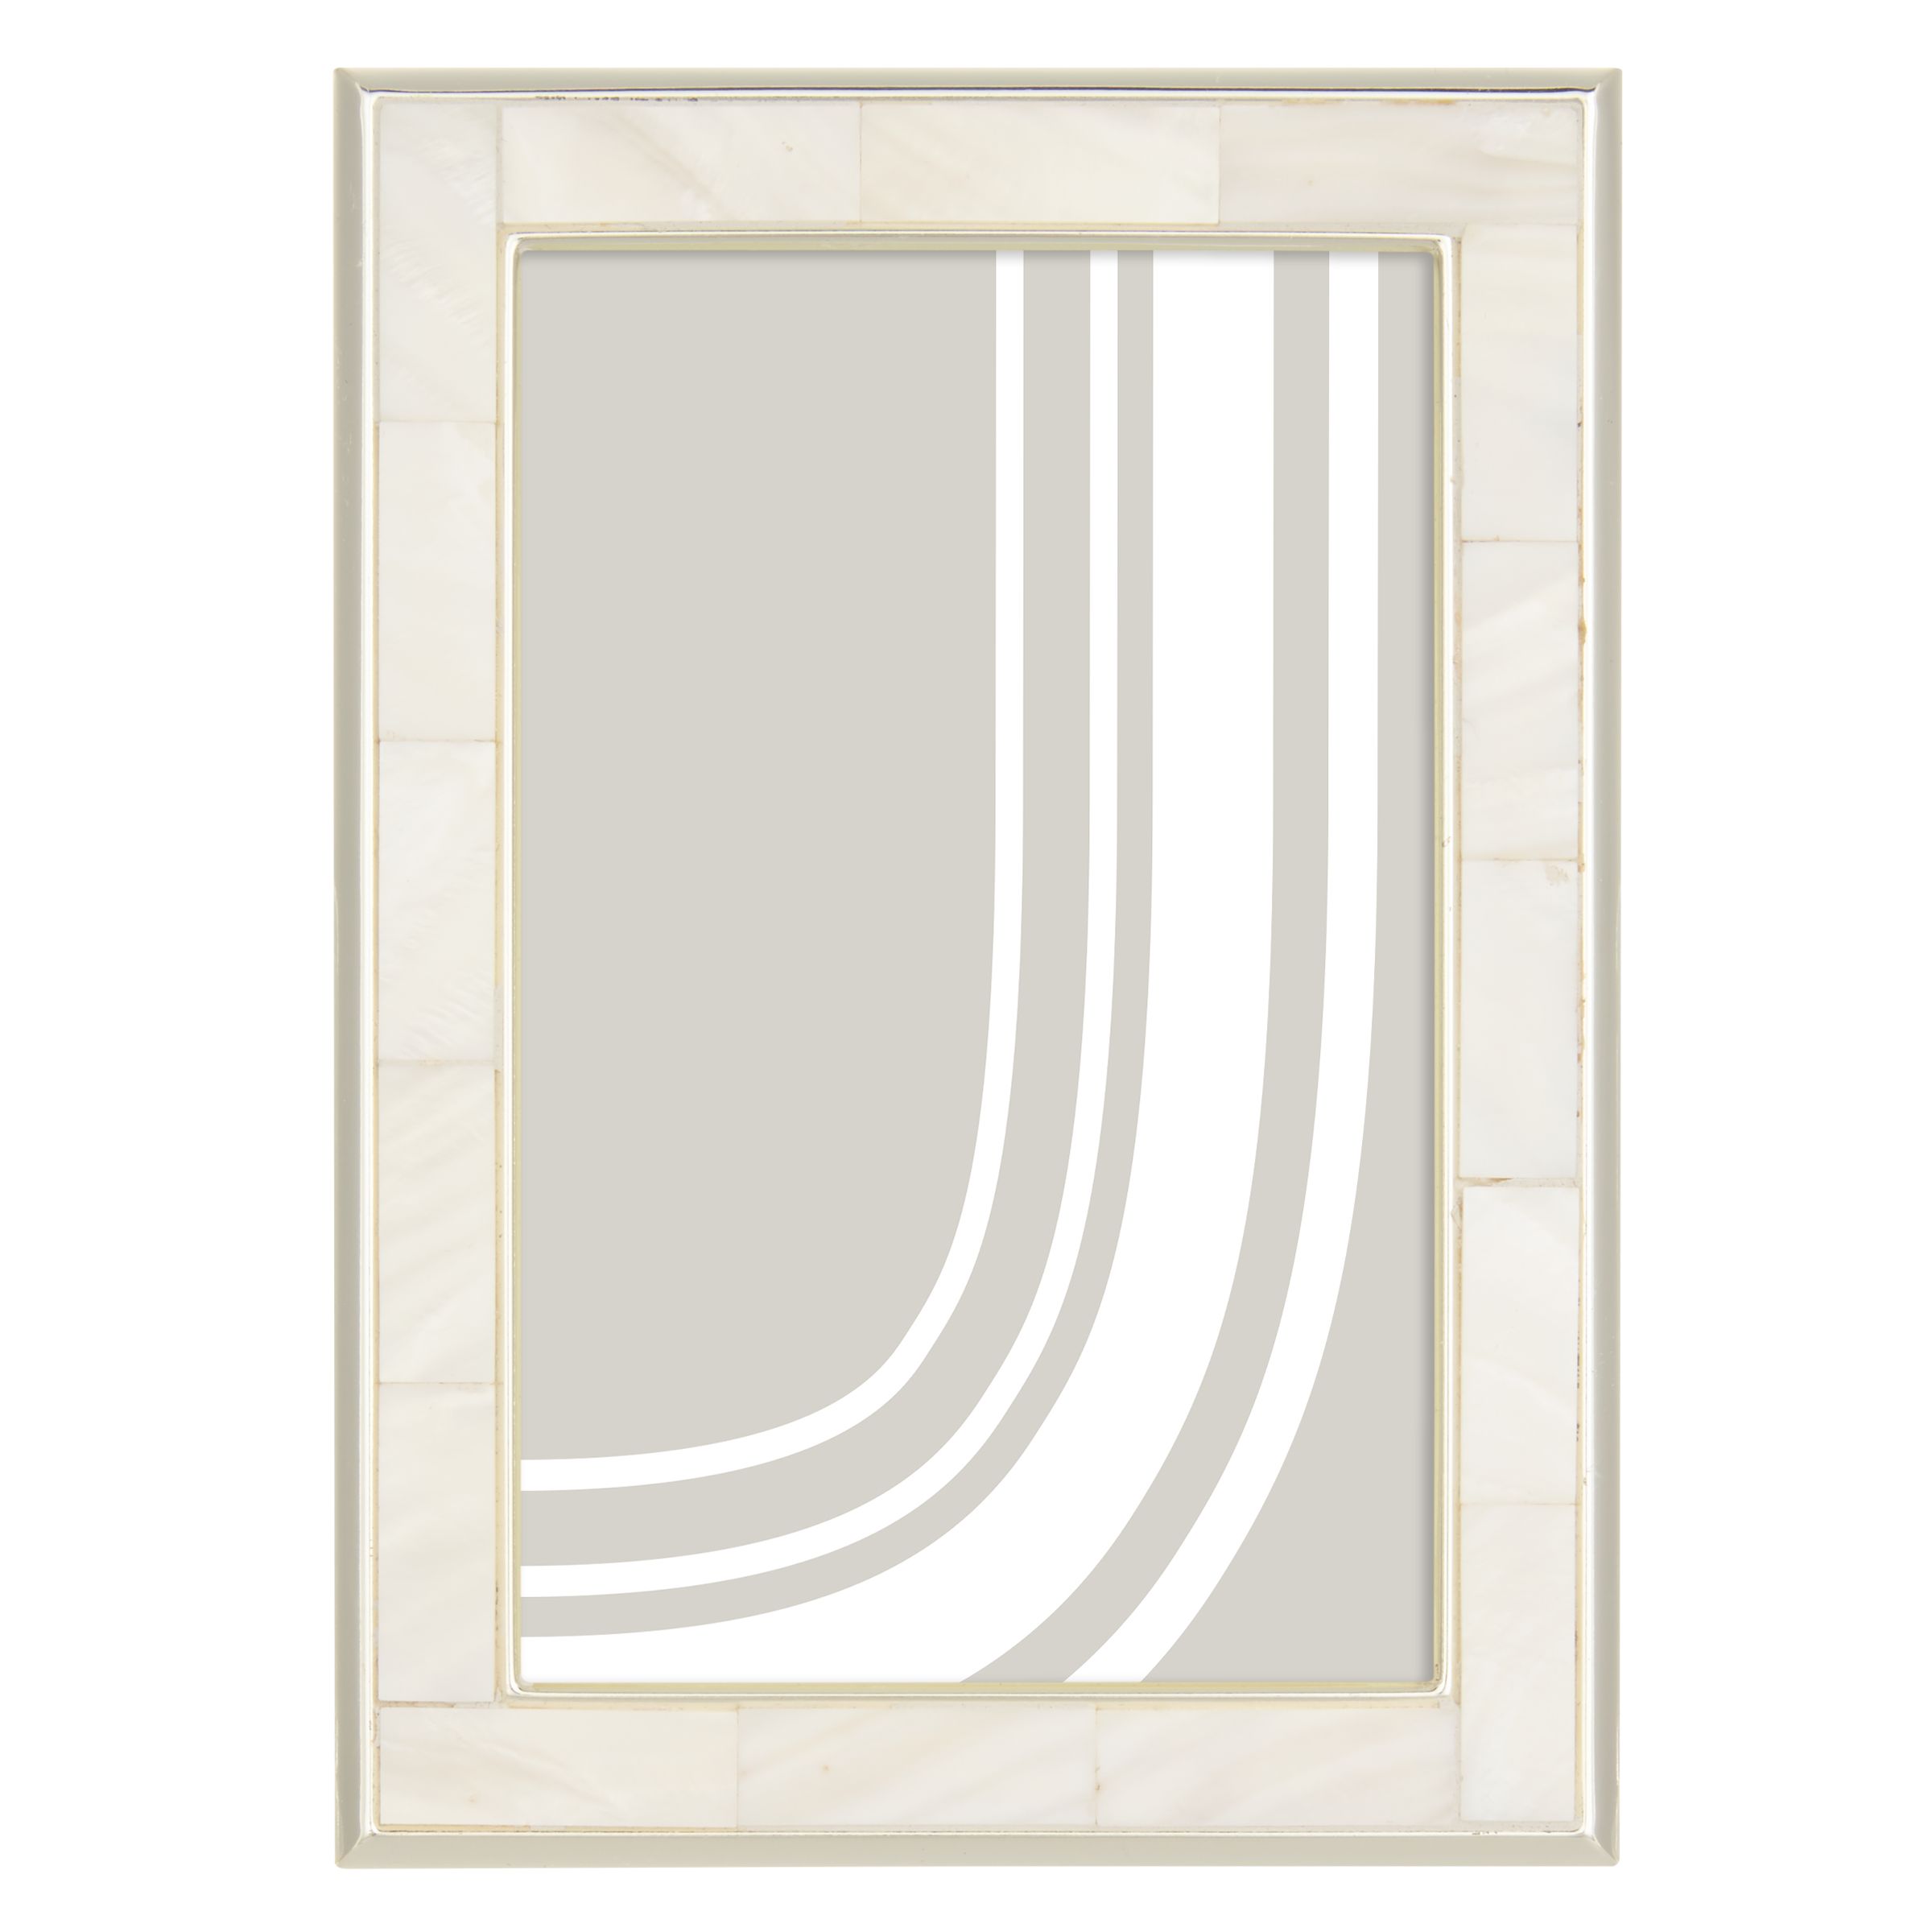  John  Lewis  Mother Of Pearl  Photo Frame 5 x 7 13 x 18cm 